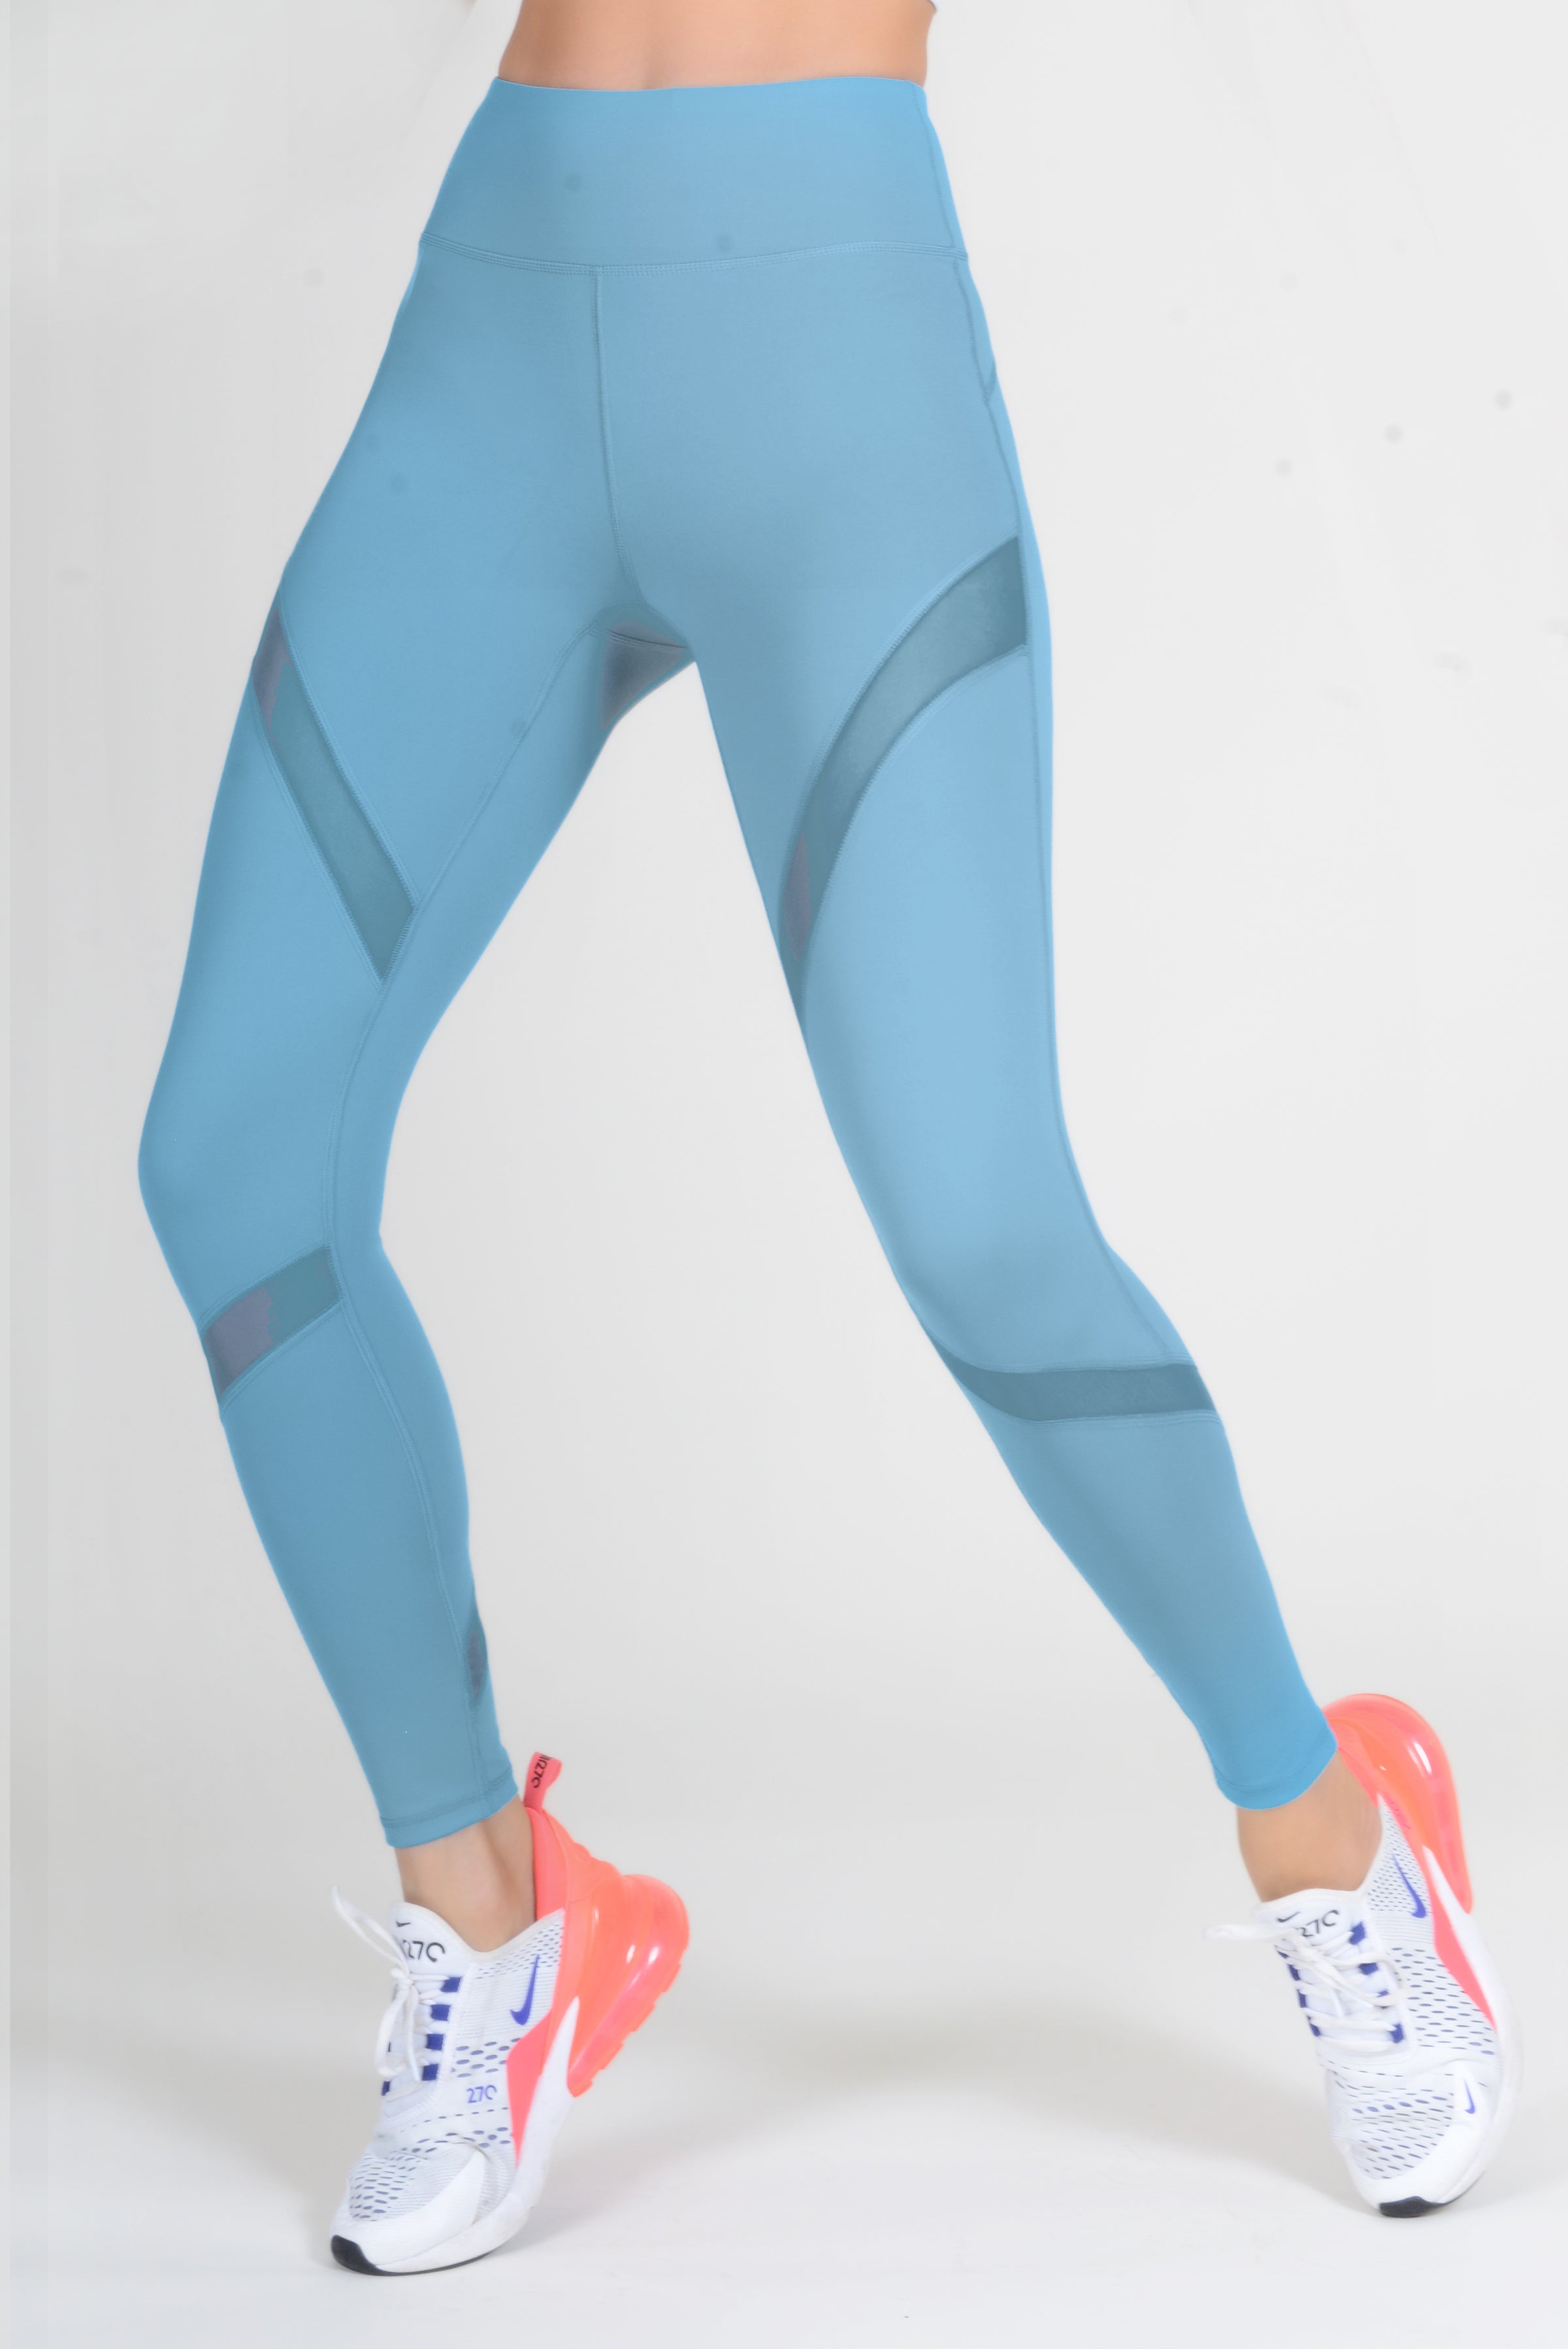 New Design Stretchy Activewear Cool Mesh Workout Leggings with Sheer Panels,  Custom Logo Squat Proof Exercise Tights Running Sweat Yoga Pants Outfits -  China Yoga Pants and Sexy Exercise Outfits price